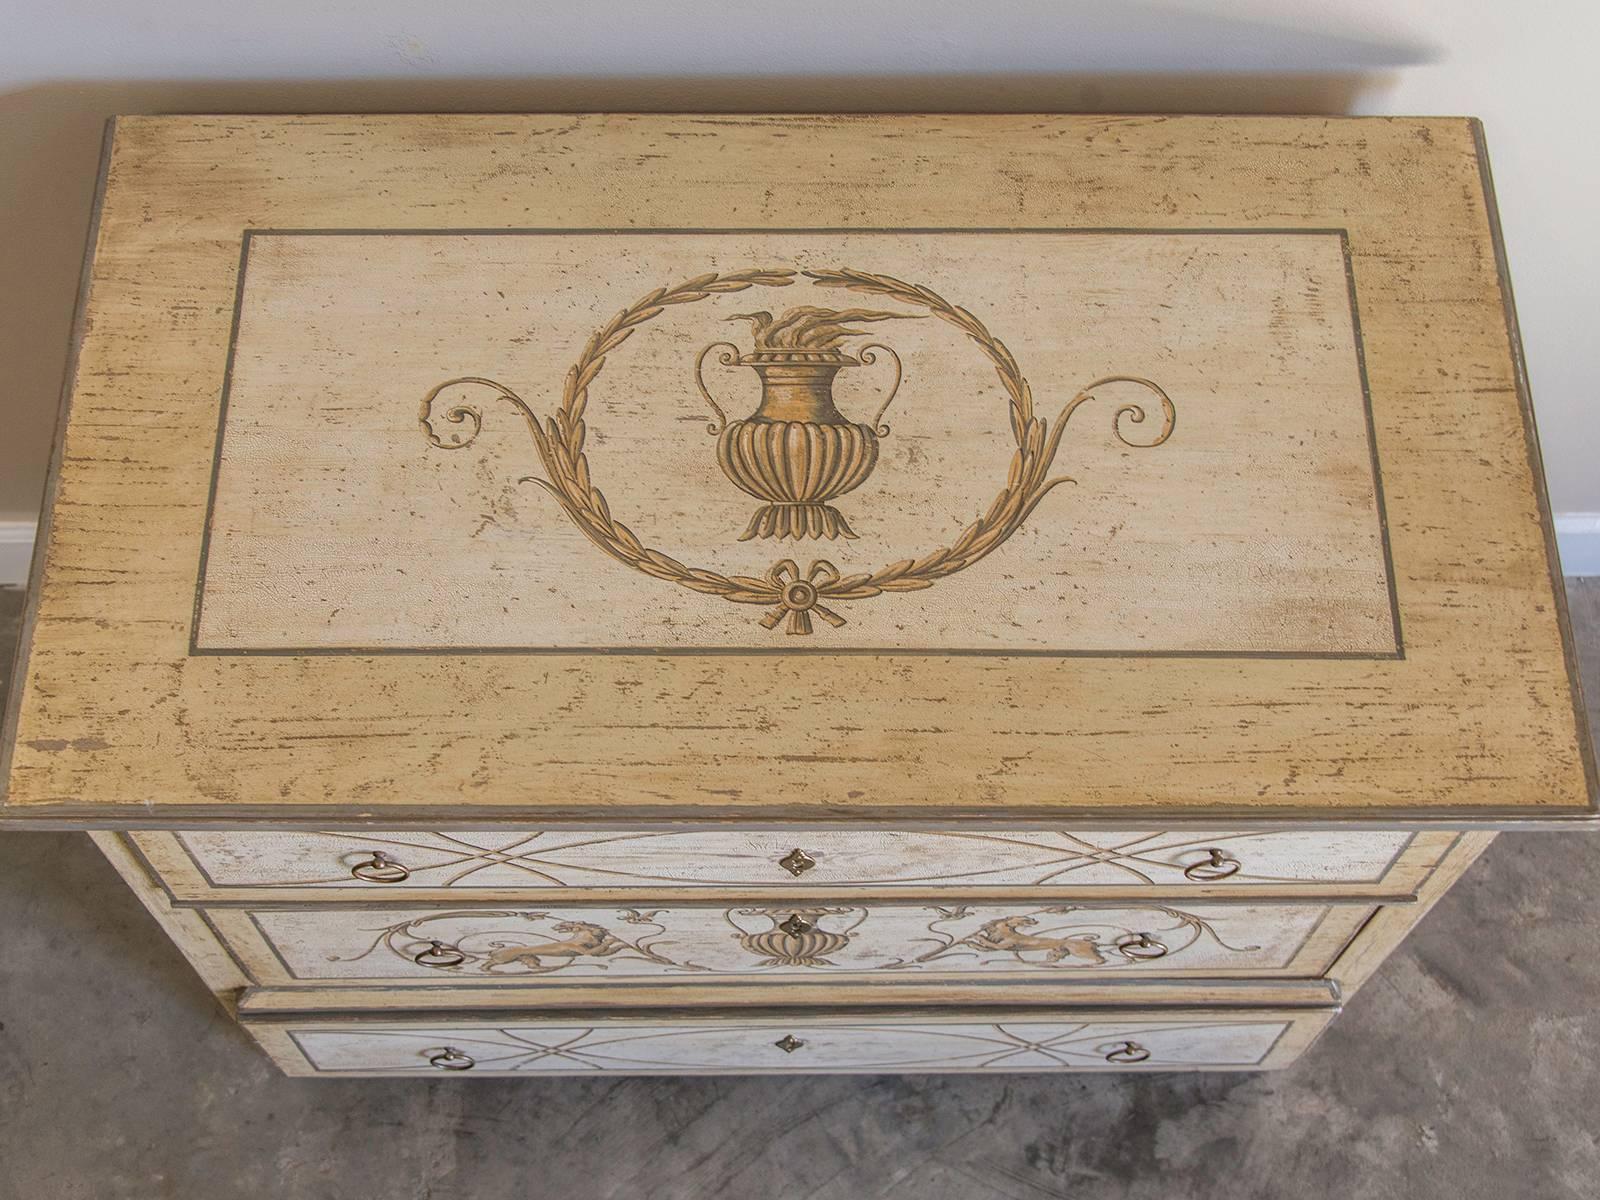 Paint Biedermeier Period Antique German Neoclassical Style Chest of Drawers circa 1830